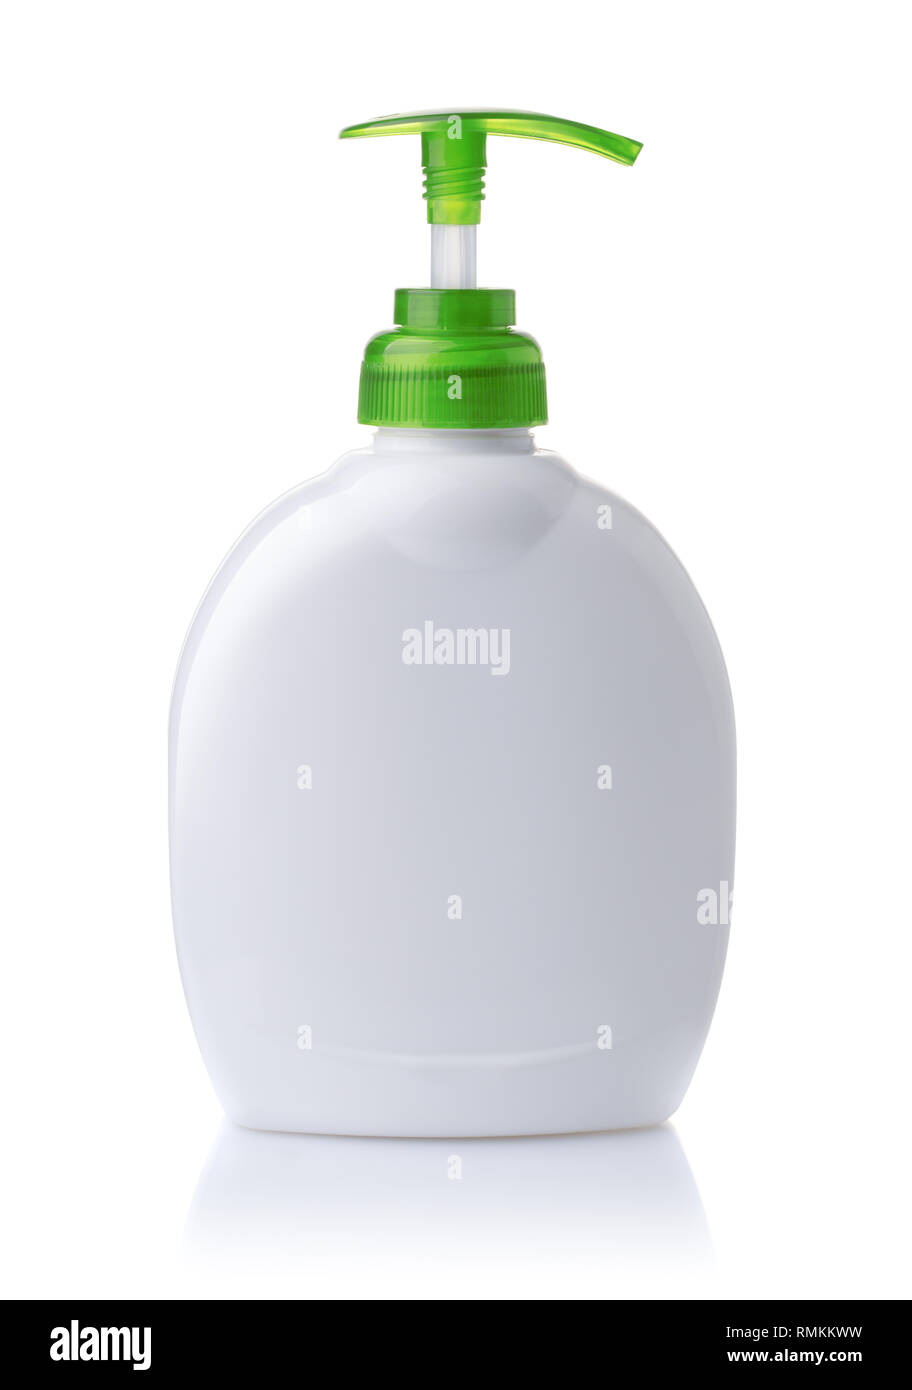 Front view of blank pump dispenser bottle mockup isolated on white Stock Photo